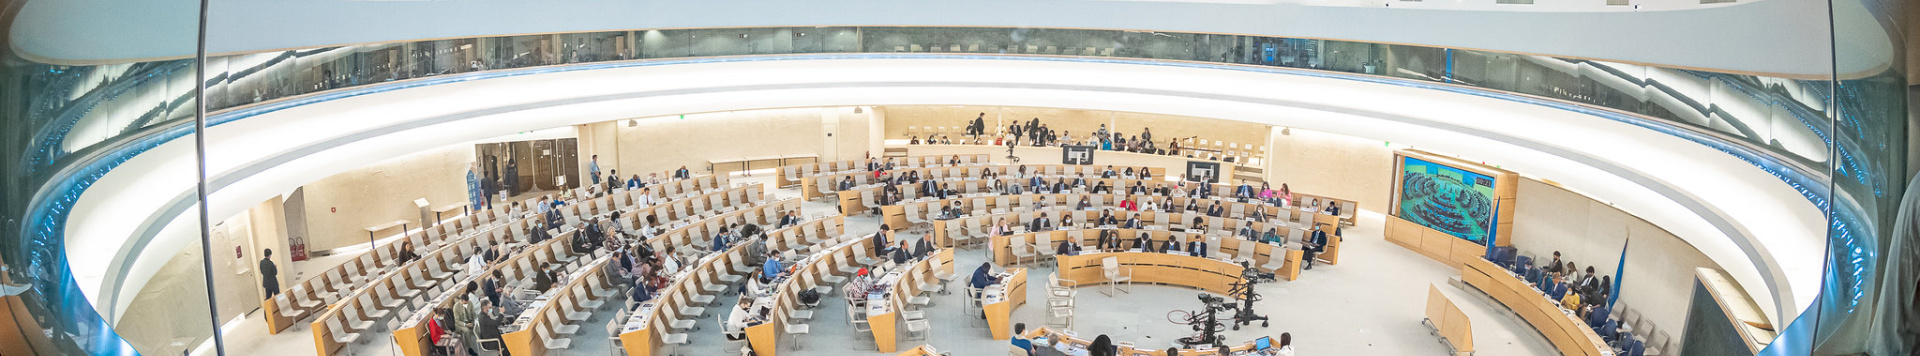 A bird's view on the Human Rights Council chamber